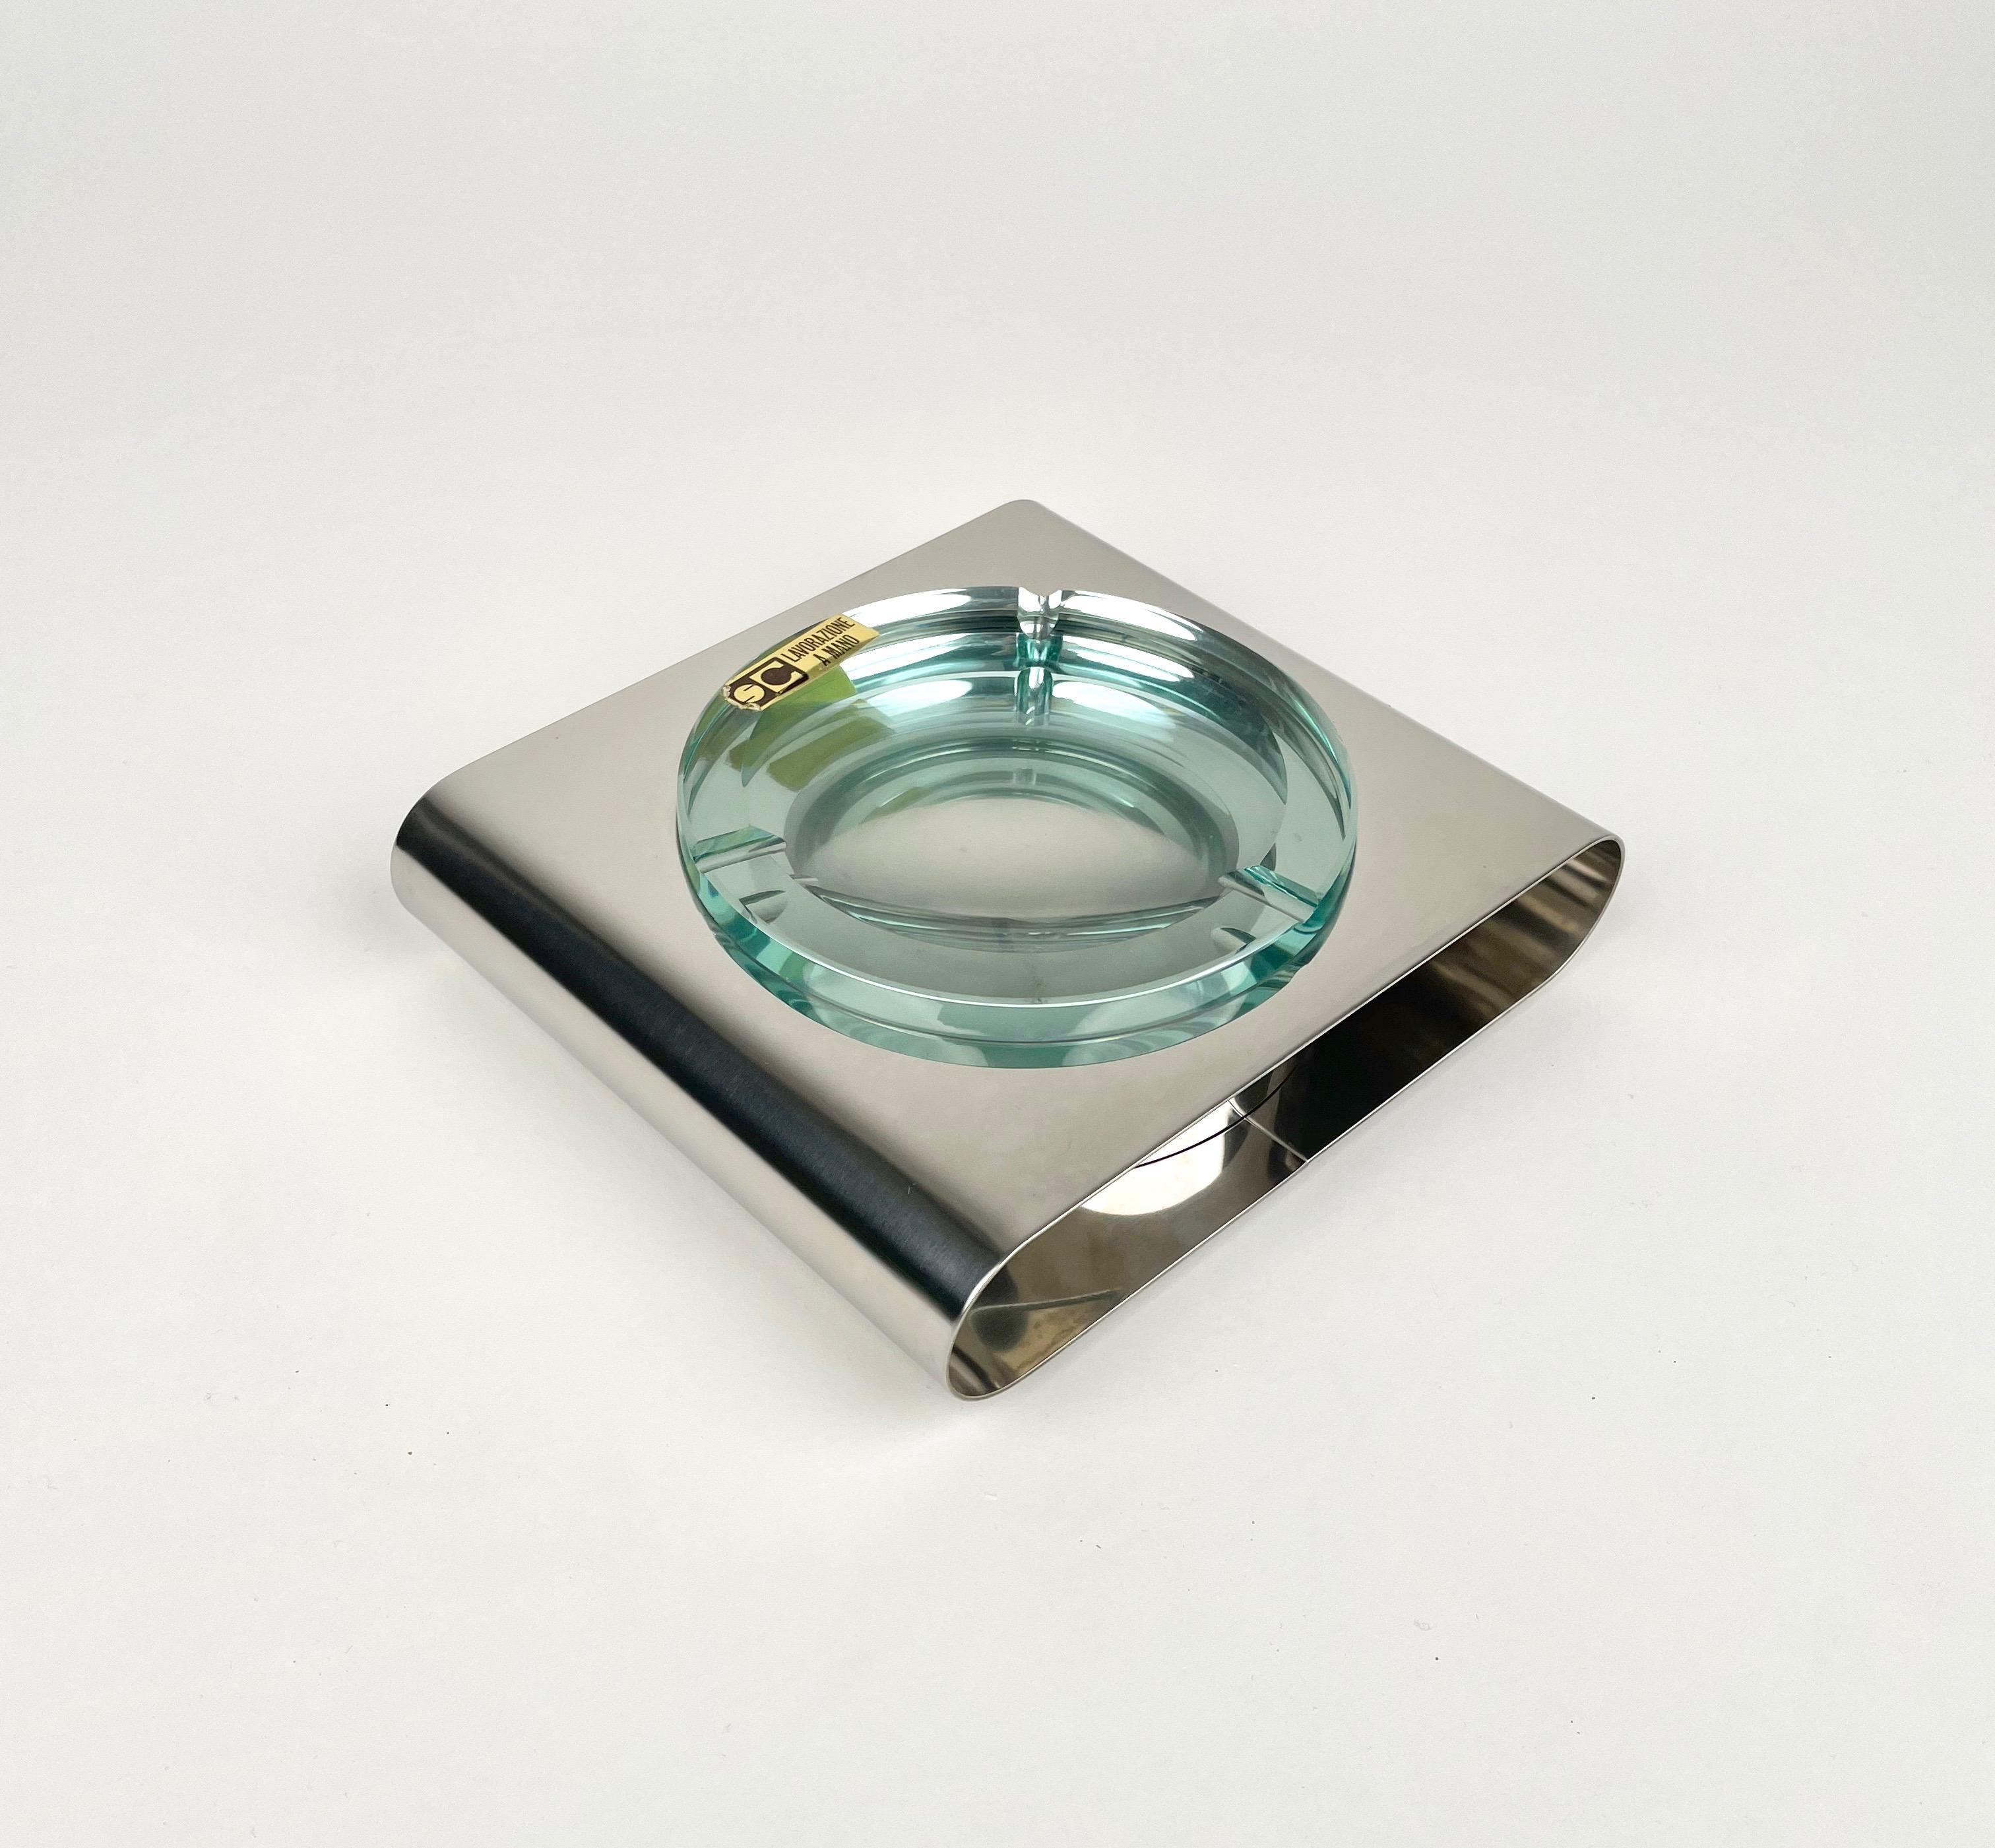 Metal Ashtray Sena Cristal Steel and Green Glass, Italy, 1970s For Sale